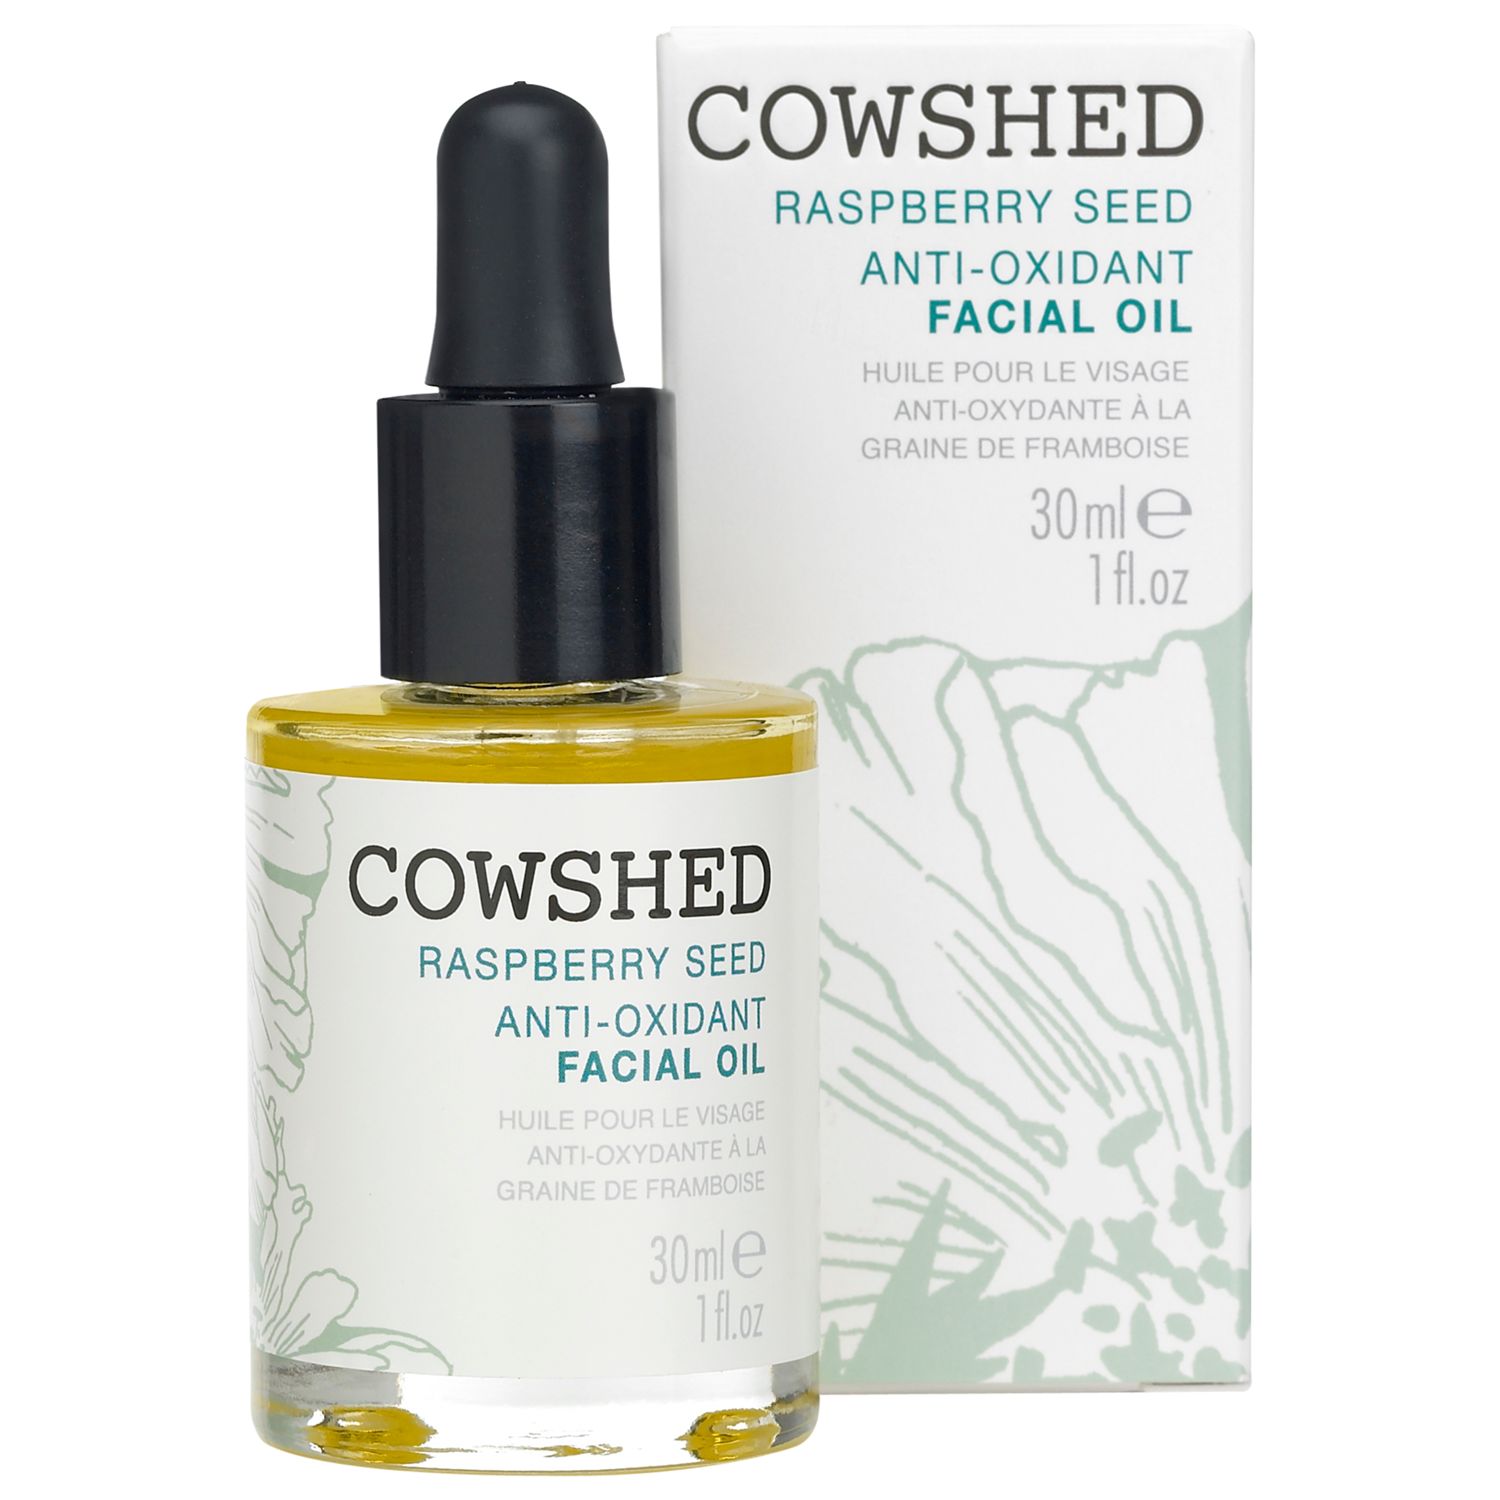 Cowshed Raspberry Seed Anti-Oxidant Facial Oil,